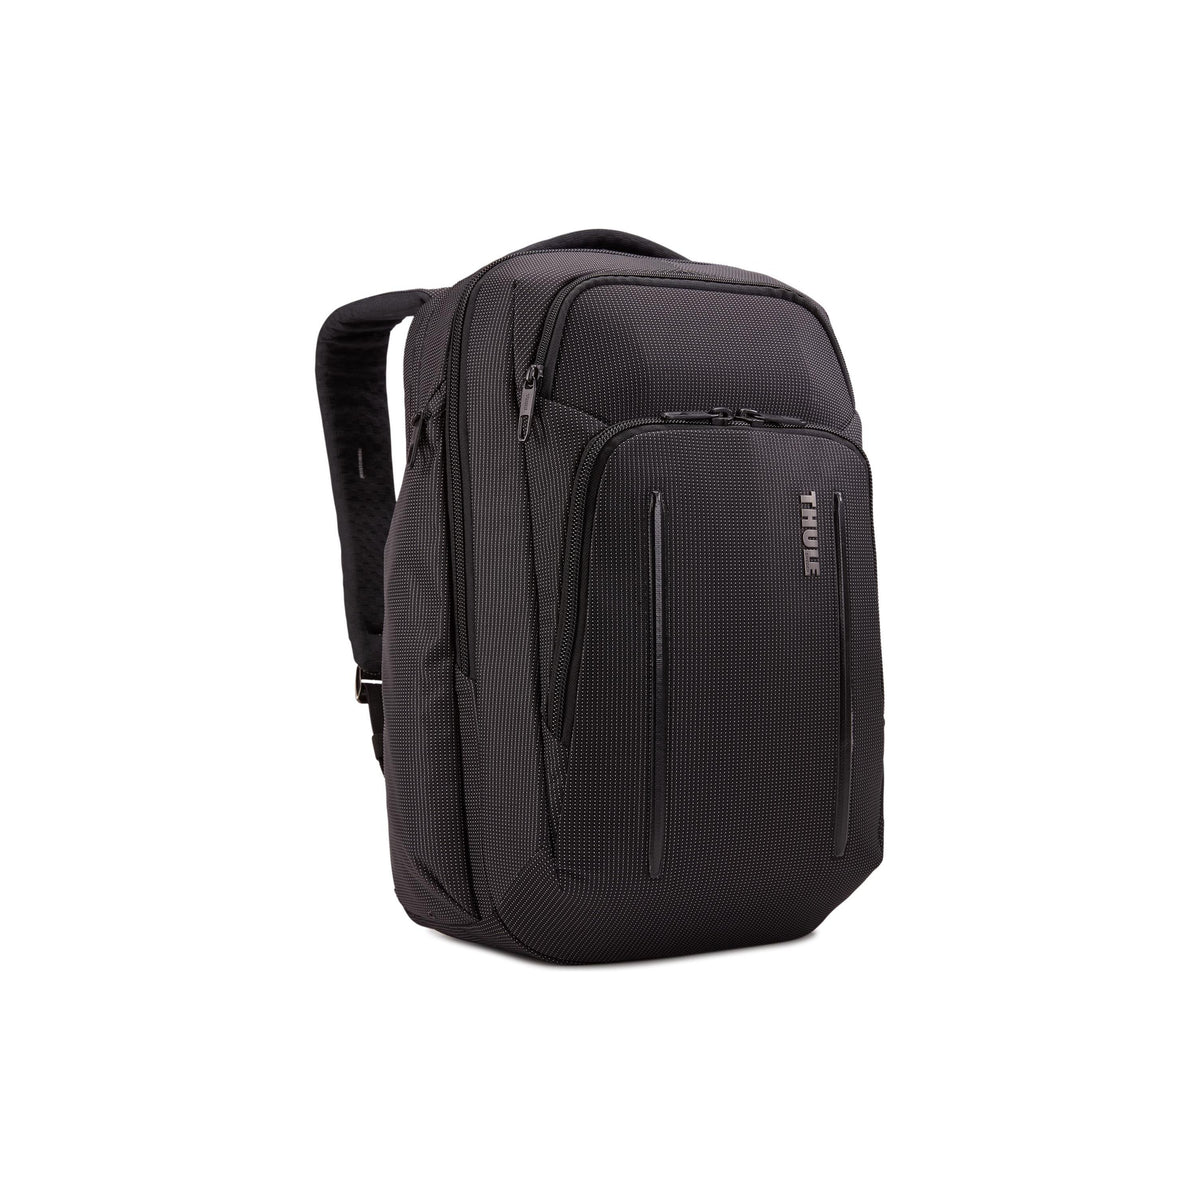 Thule Crossover 2 30L Backpack